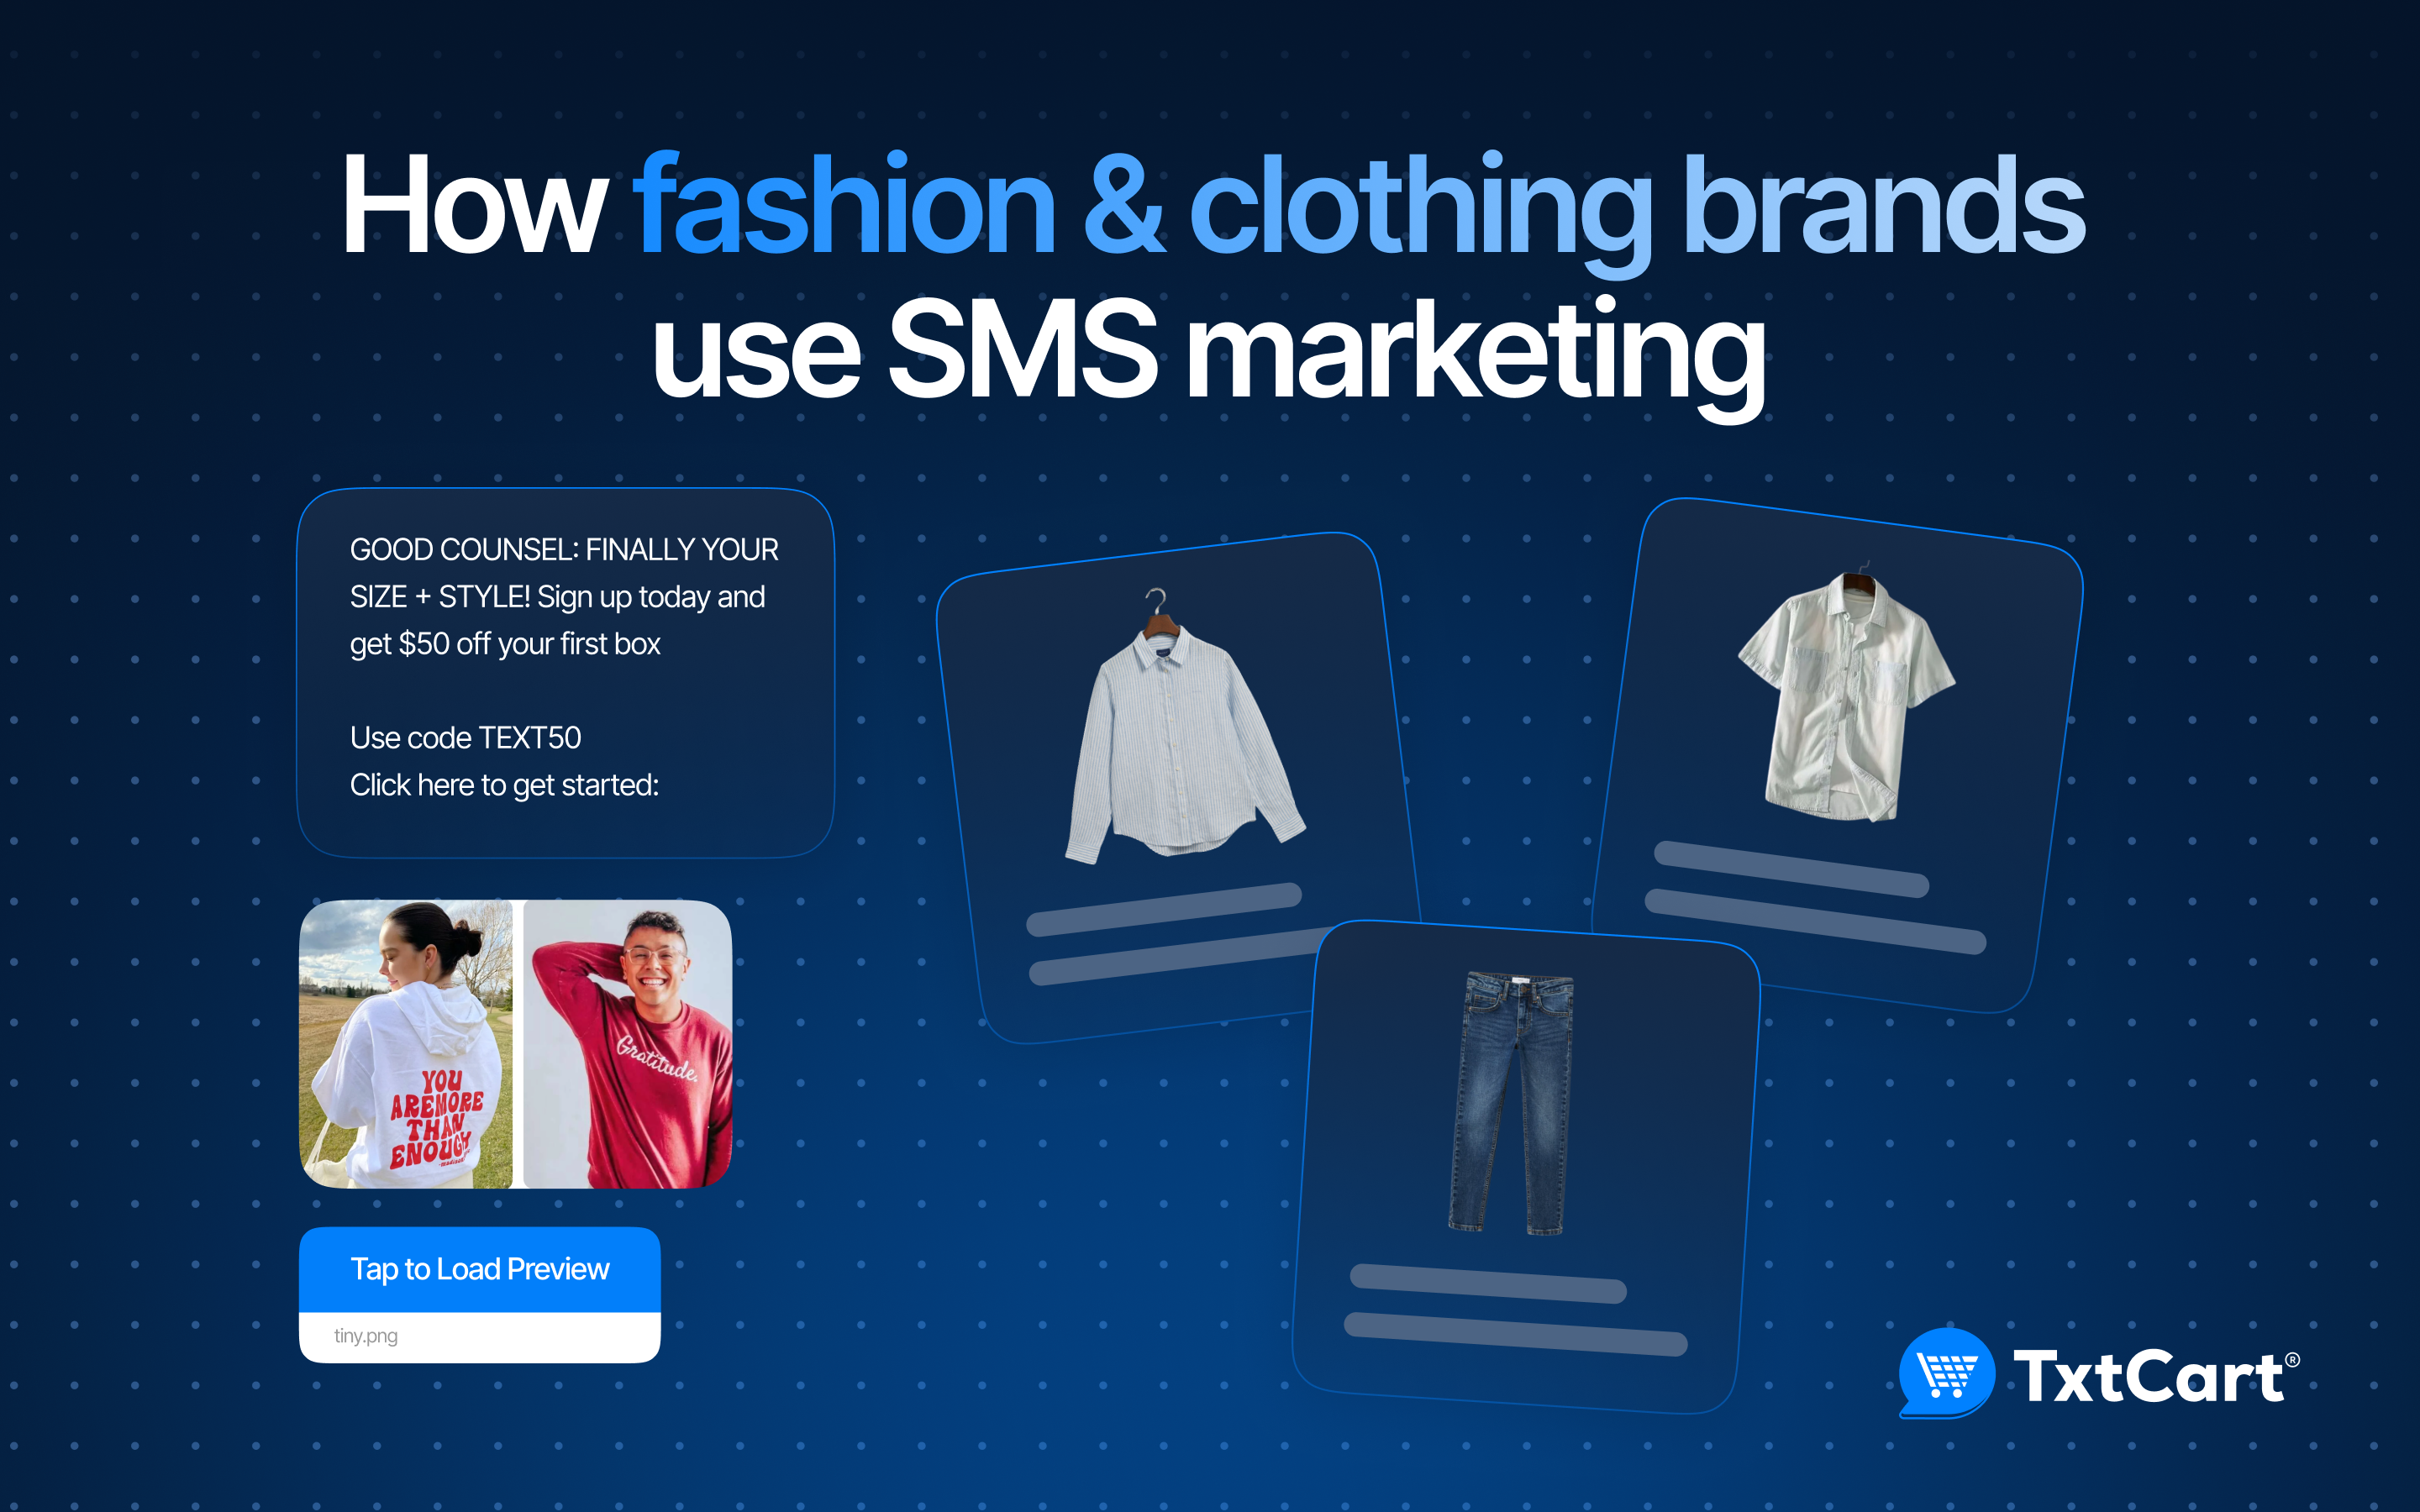 How fashion & clothing brands use SMS marketing